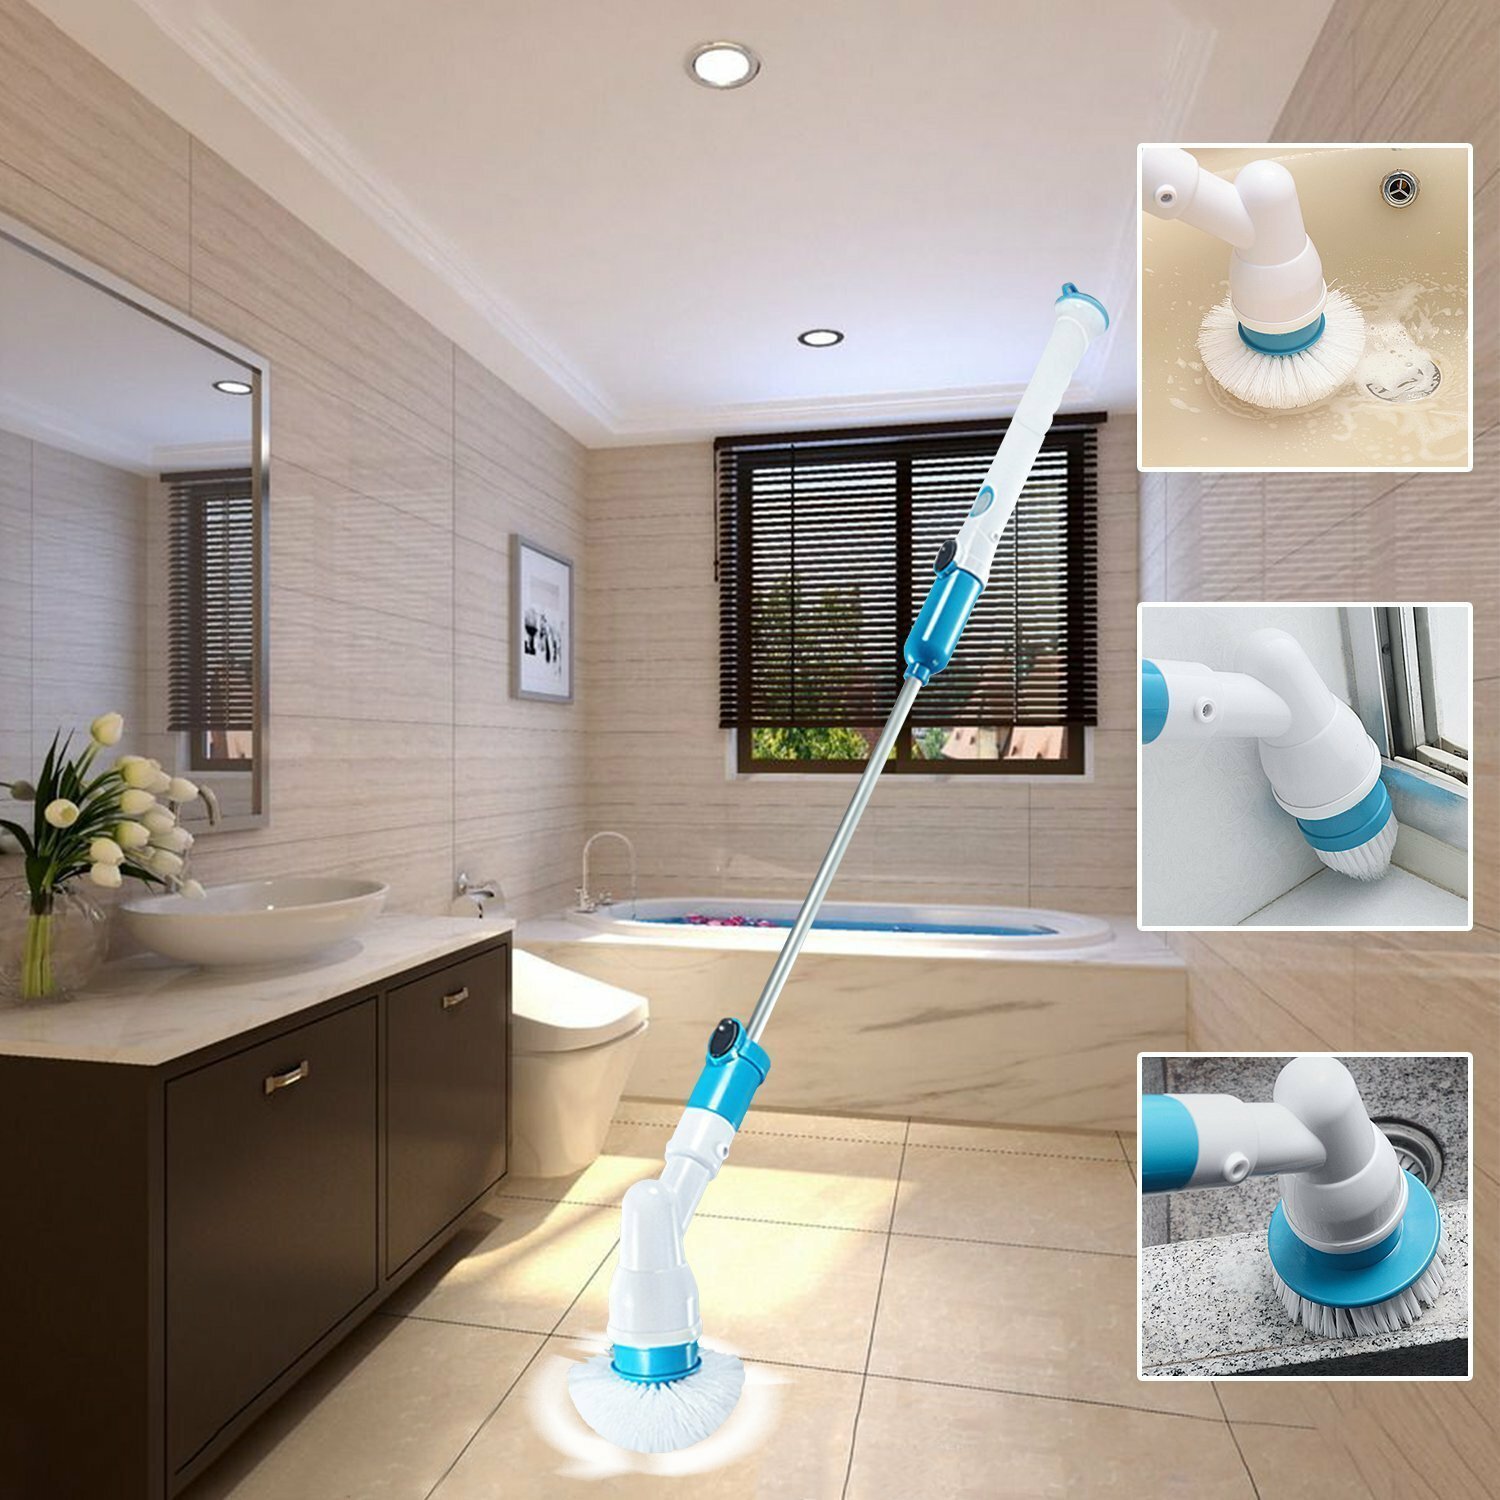 

Rechargeable Bathtub Tiles Power Floor Cleaner Brush Cordless Handle Telescopic Cleaning Mops Tools With 3 Replaceable B